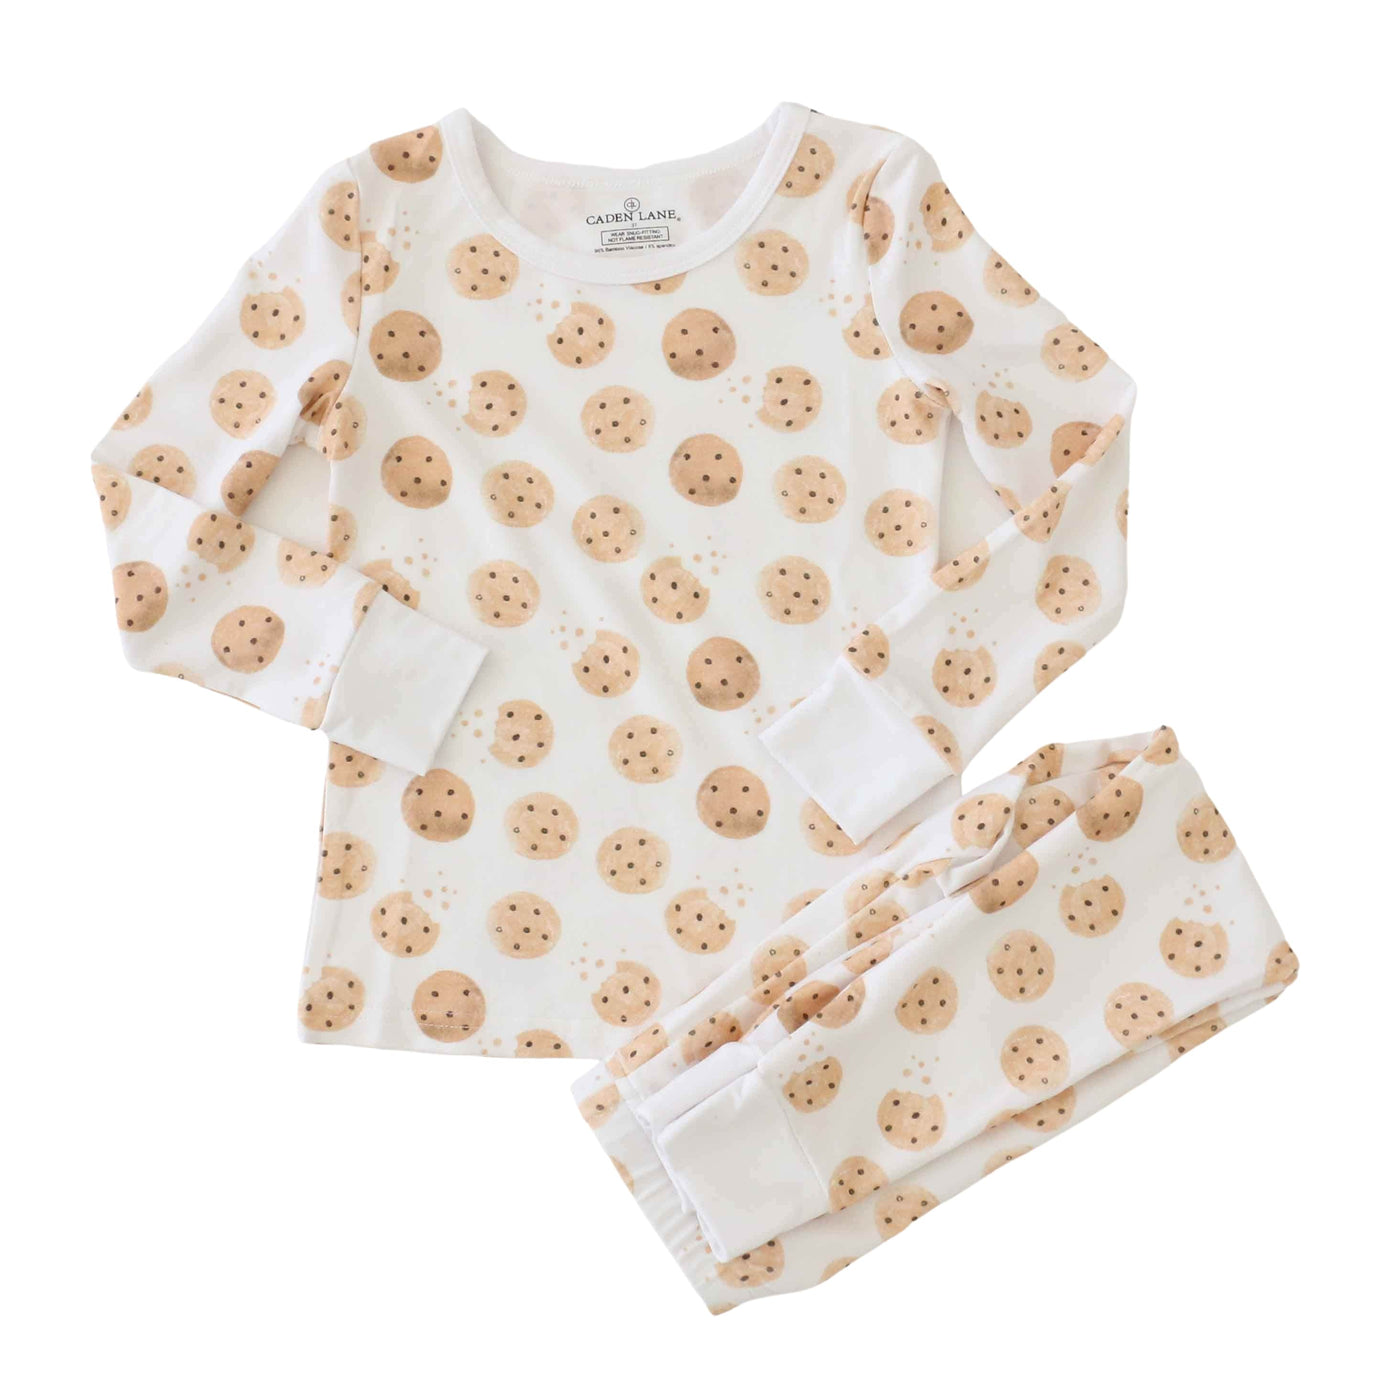 pajamas for toddlers two pieces 